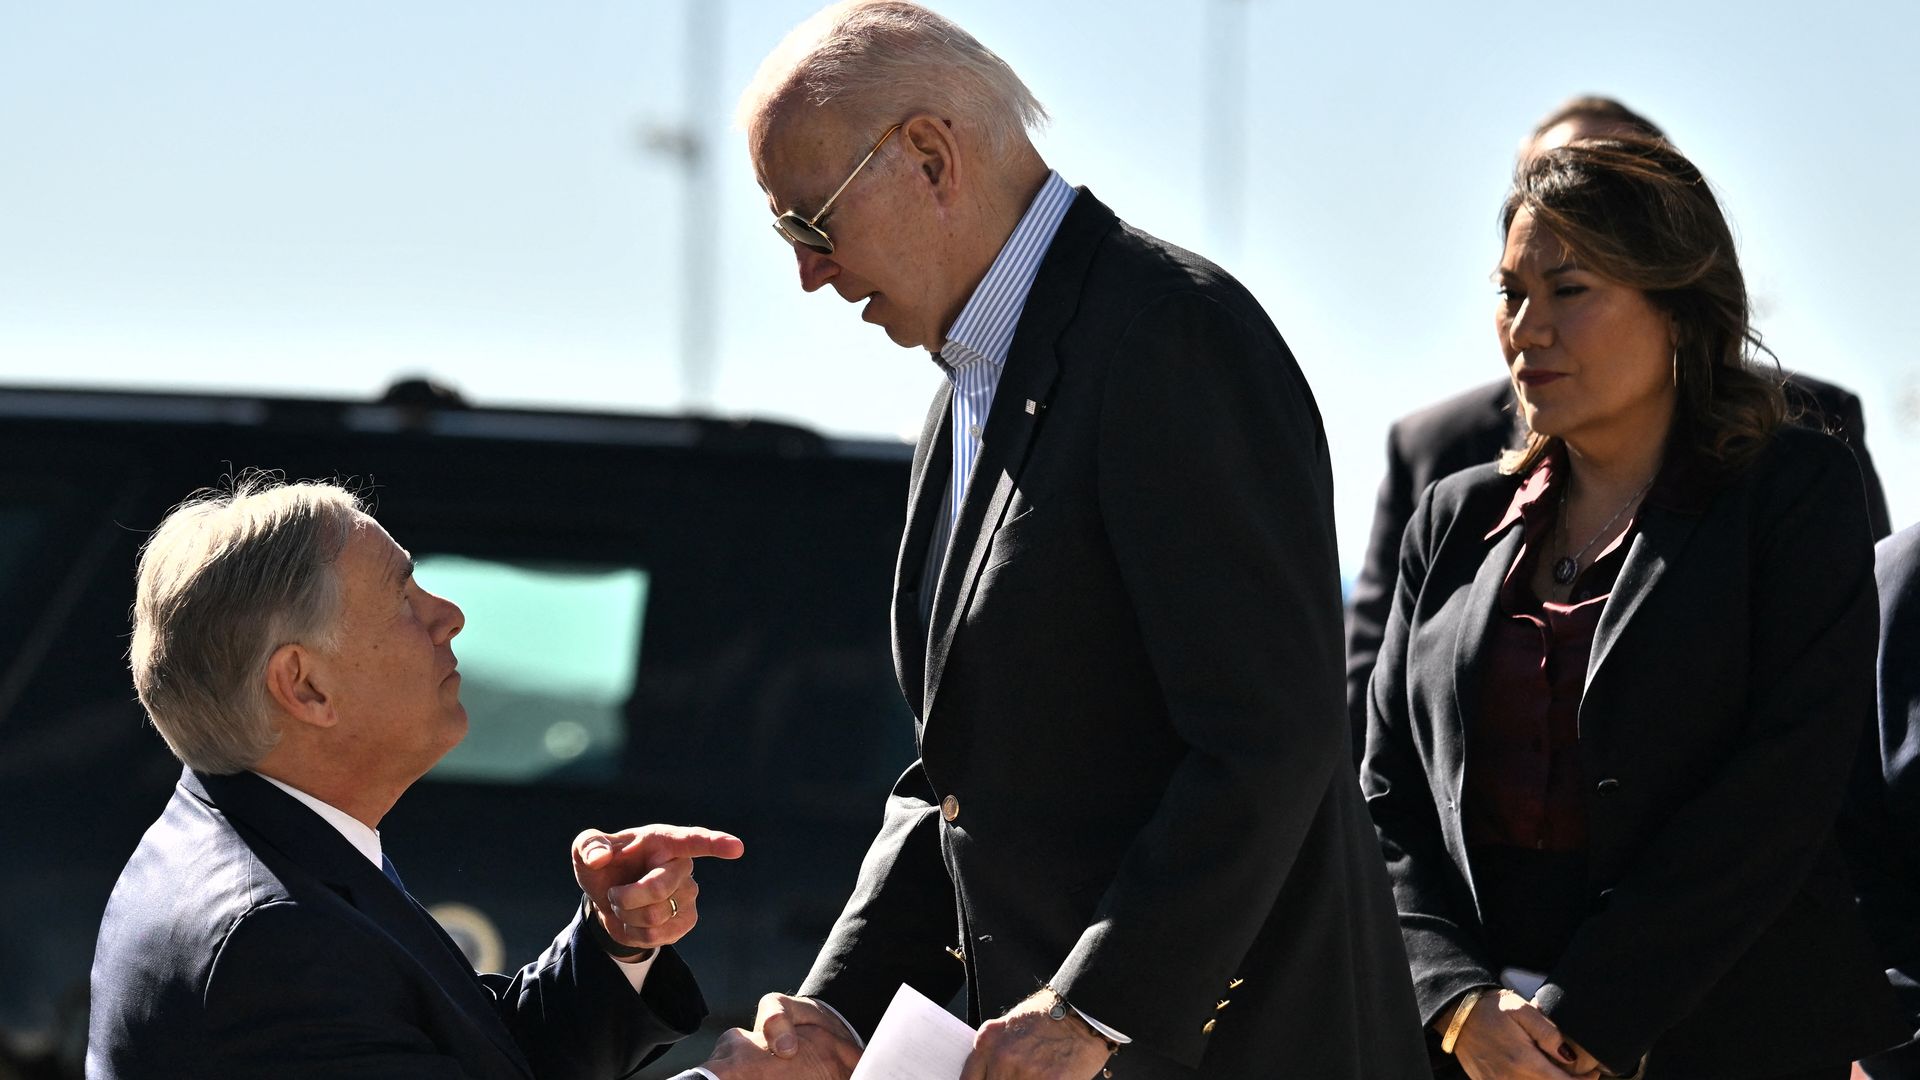 President Biden shaking hands with Texas Gov. Greg Abbott after departing an airplane in El Paso on Jan. 8.